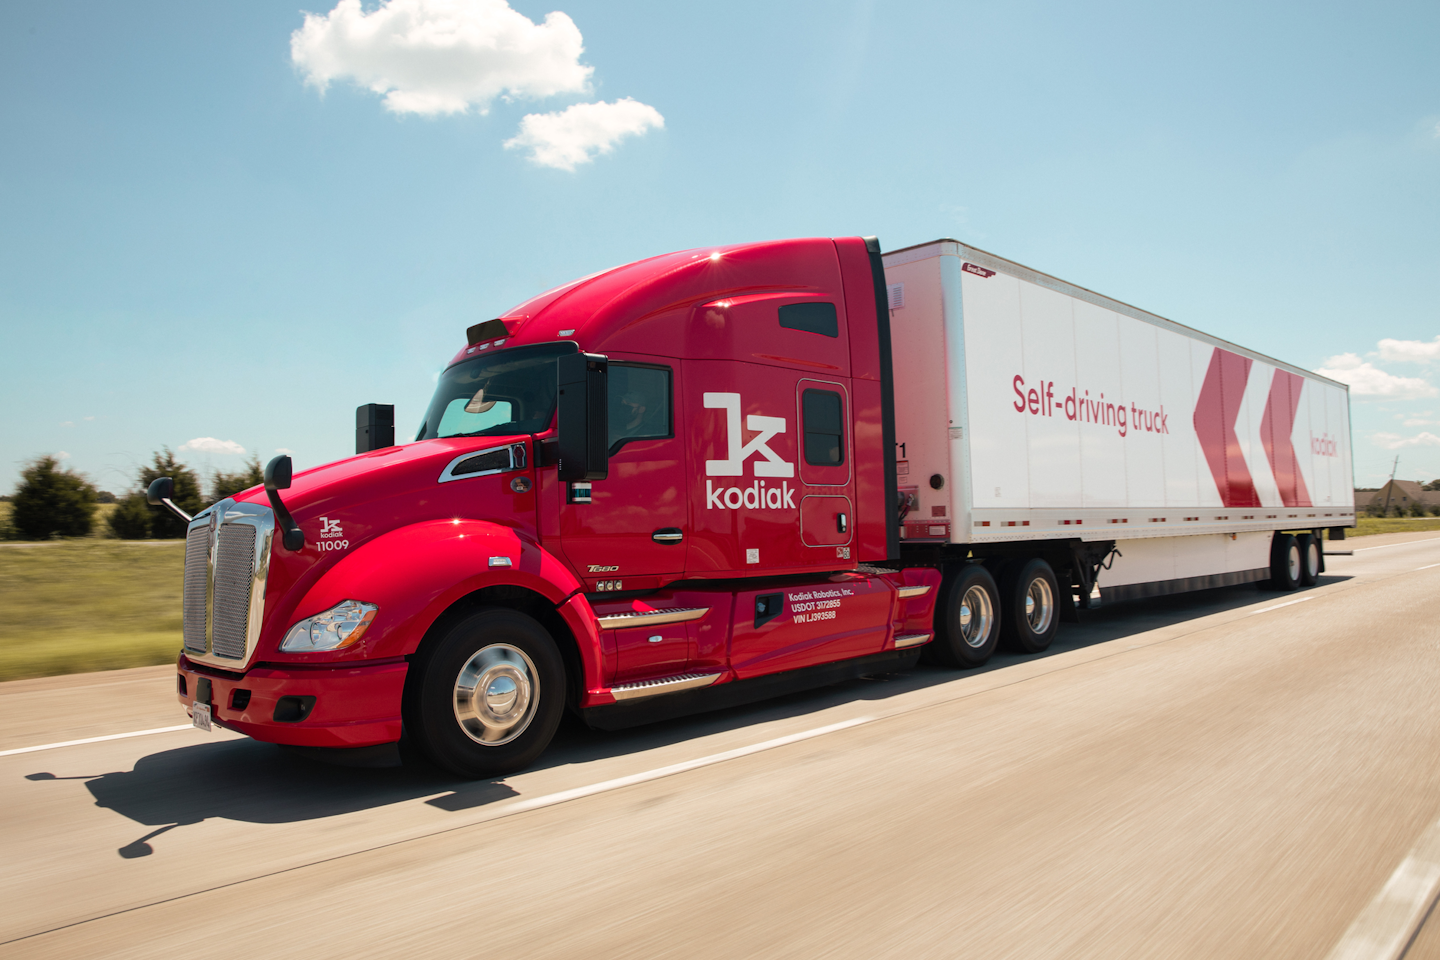 Kodiak has ordered 15 new Paccar trucks for its fourth-generation autonomous trucking system.